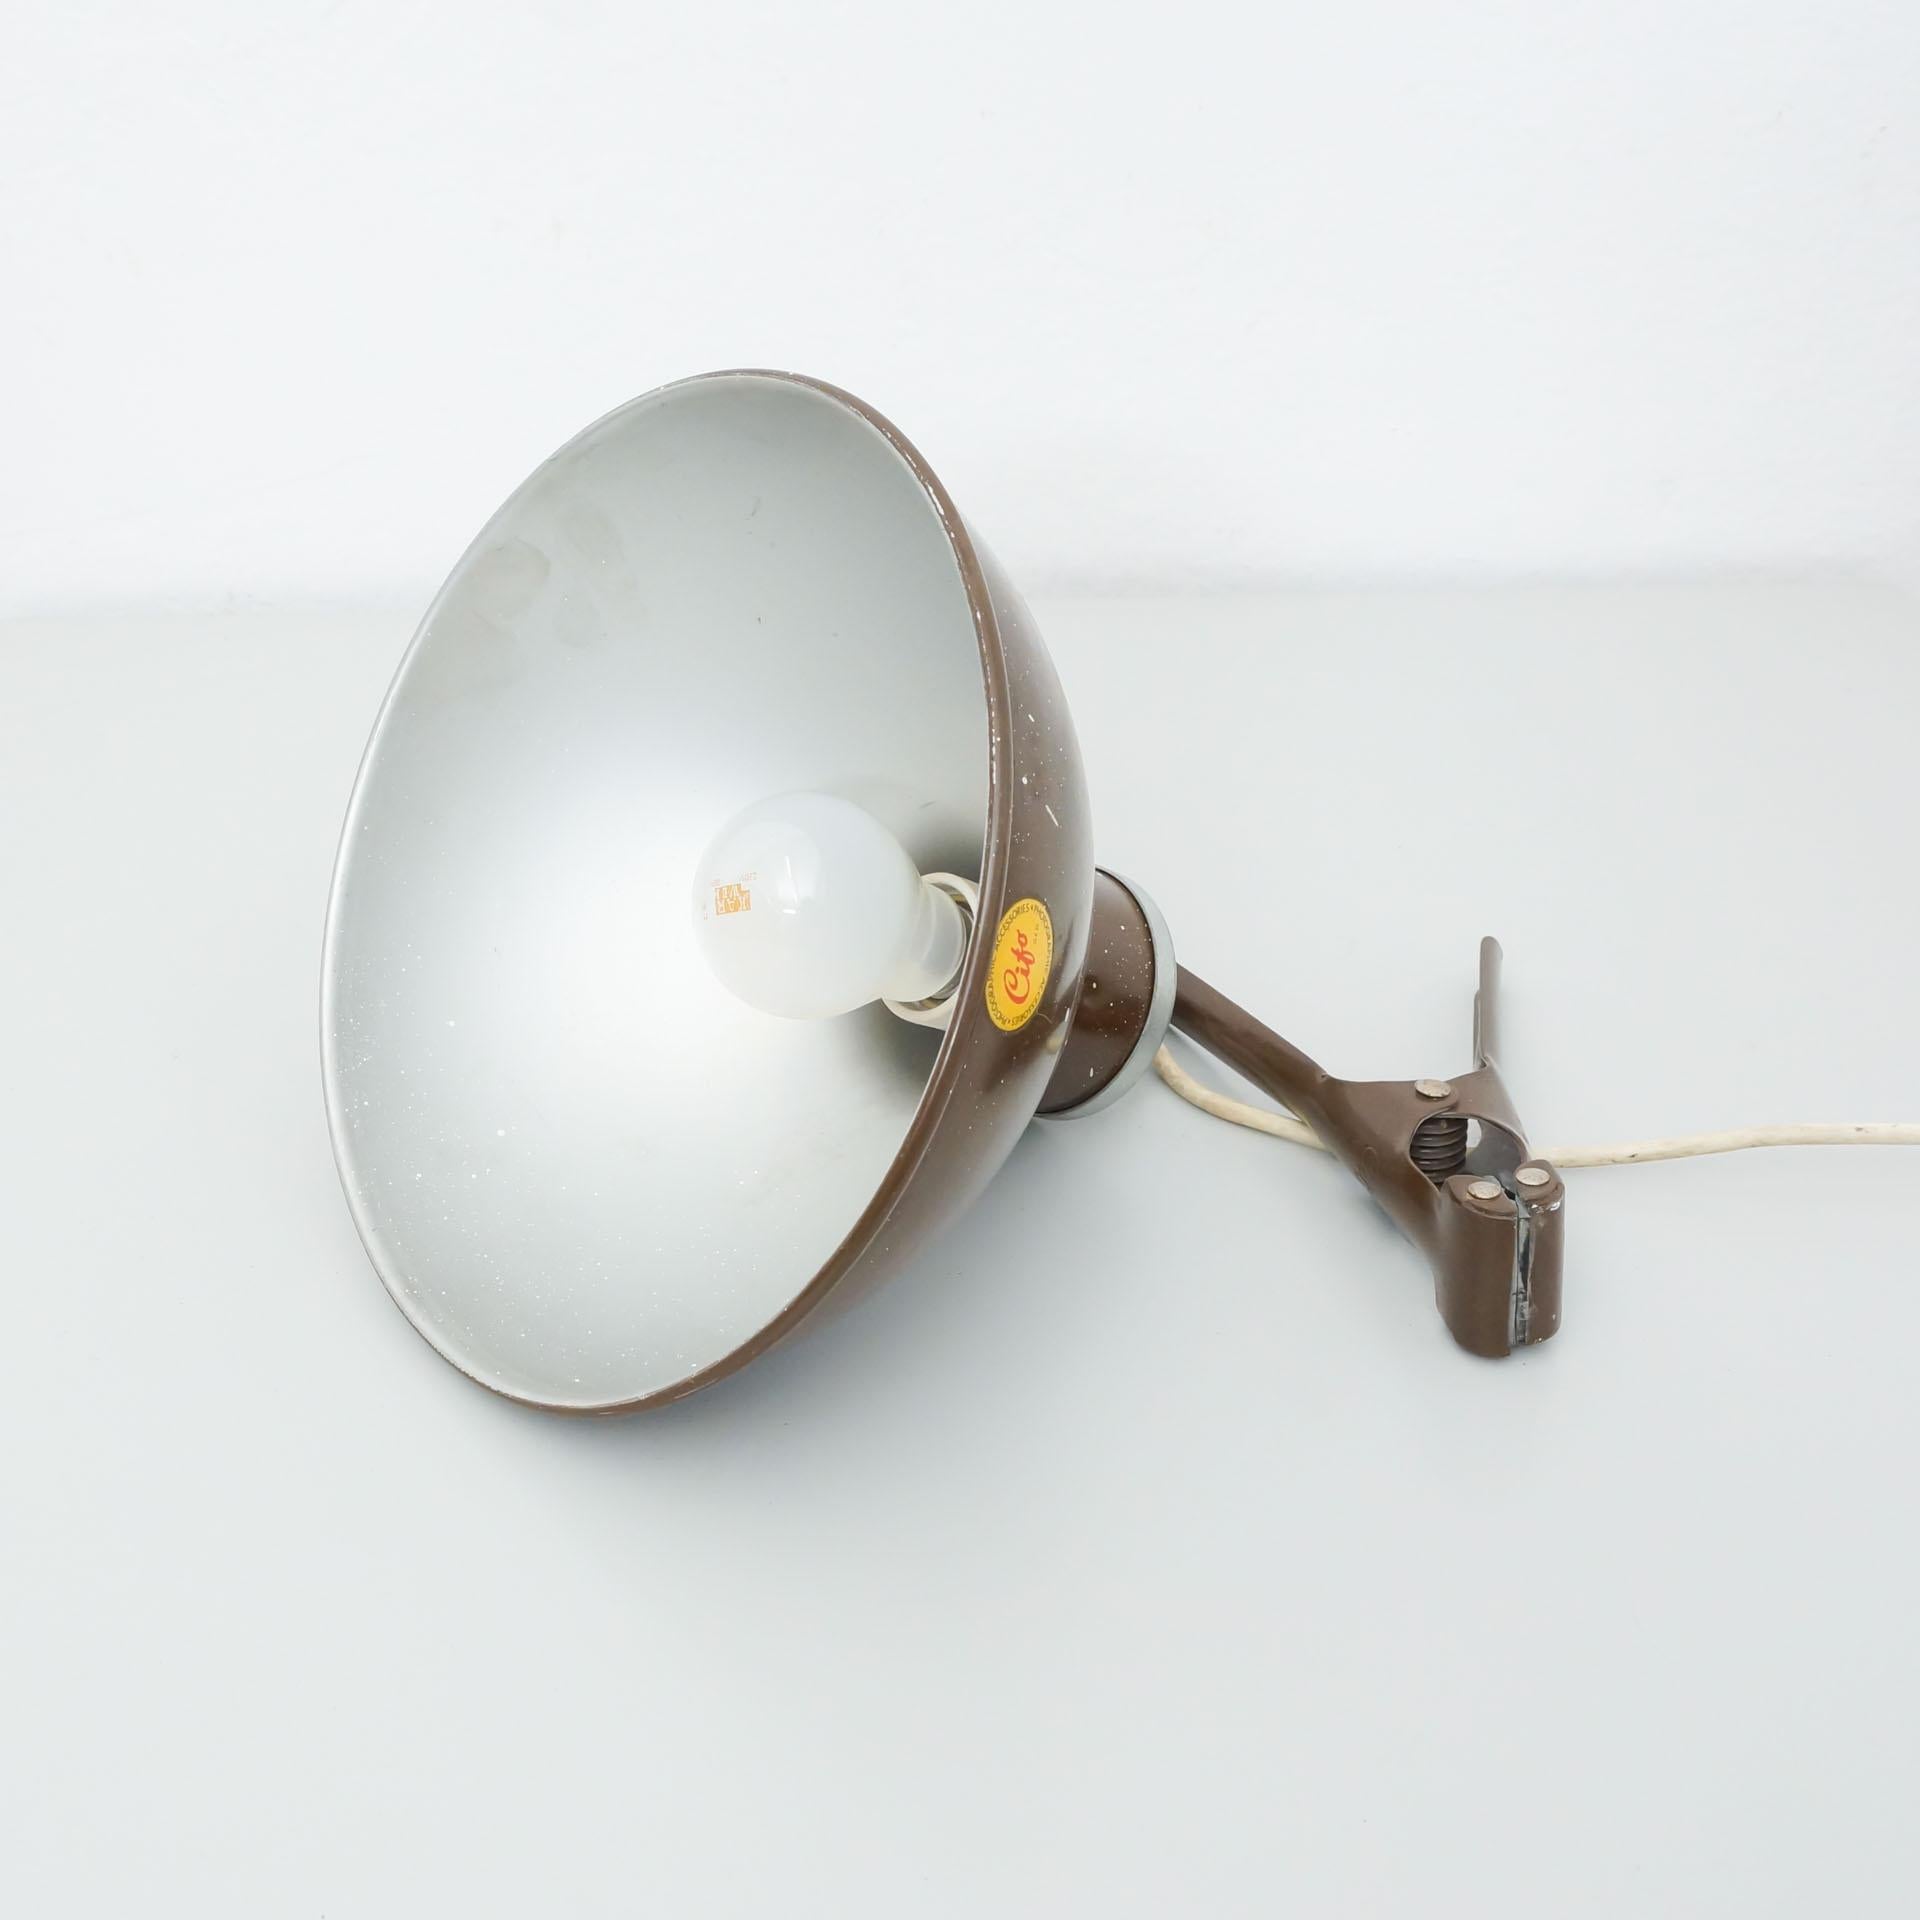 Lamp, circa 1940.
By unknown manufacturer, from Spain.

In original condition, with some visible signs of previous use and age, preserving a beautiful patina.

Materials:
Metal

Dimensions:
ø 25.5 cm x H 23 cm.